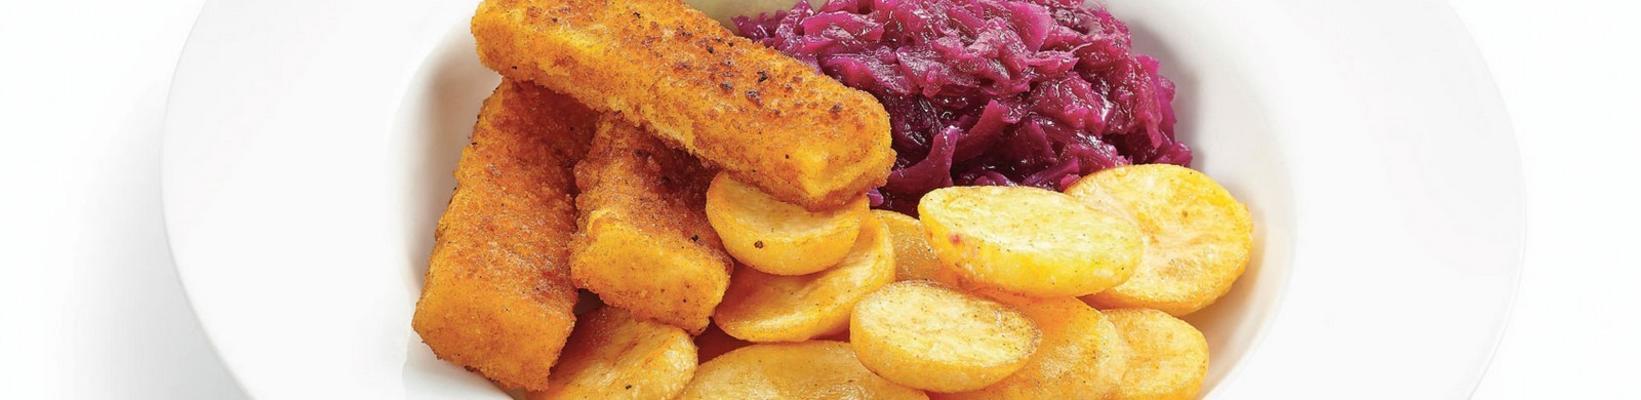 fish fingers with potato slices and red cabbage with apples